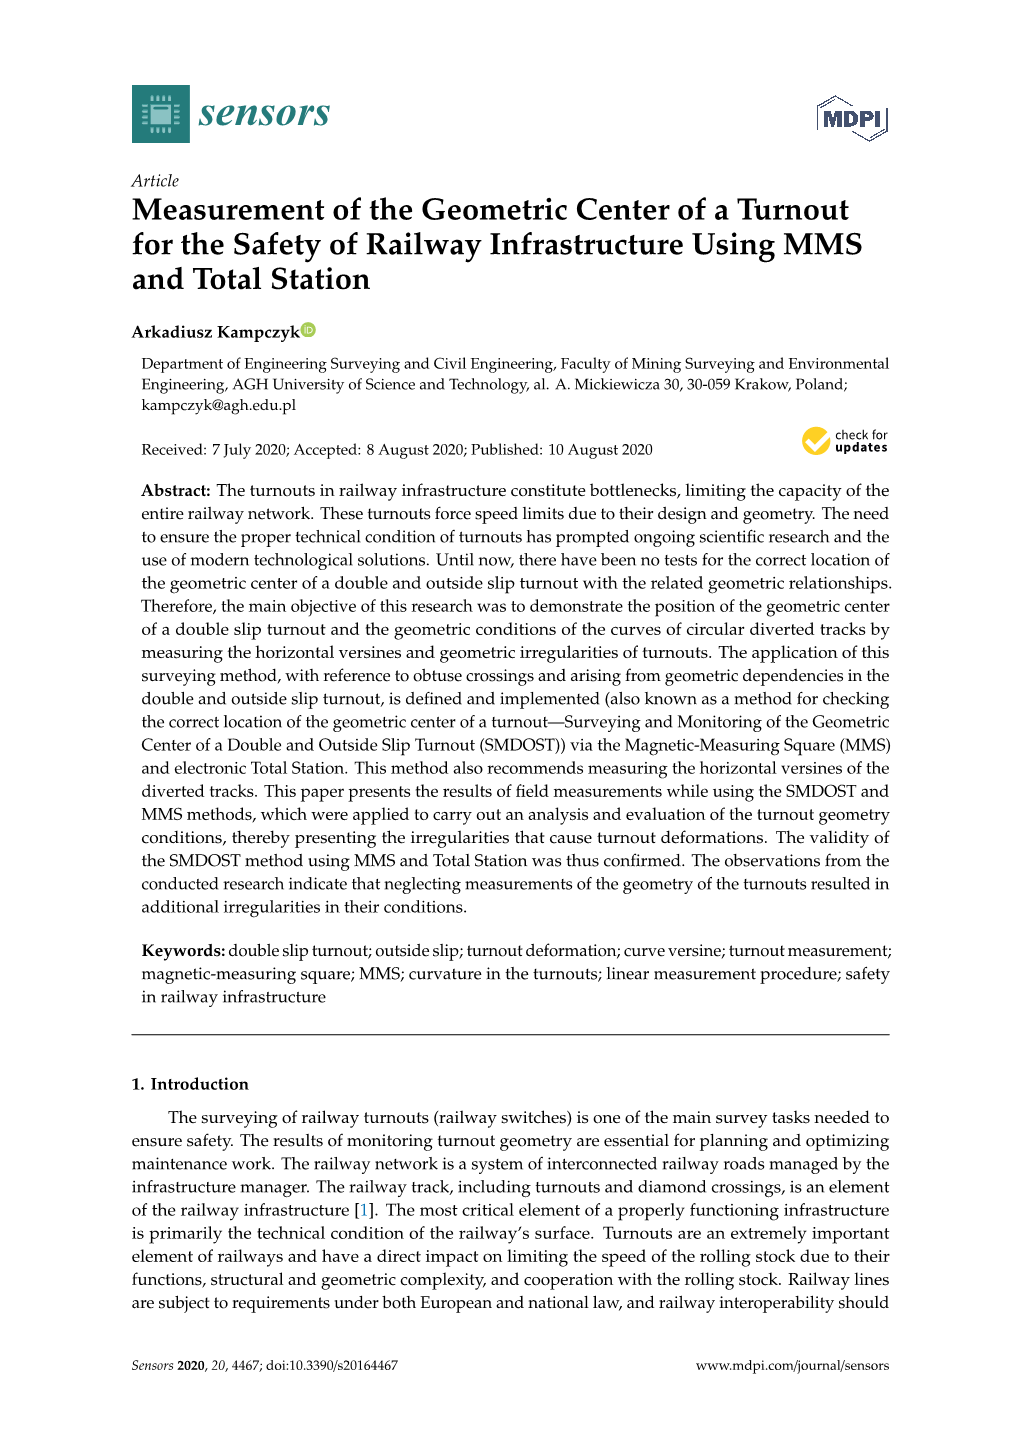 Measurement of the Geometric Center of a Turnout for the Safety of Railway Infrastructure Using MMS and Total Station